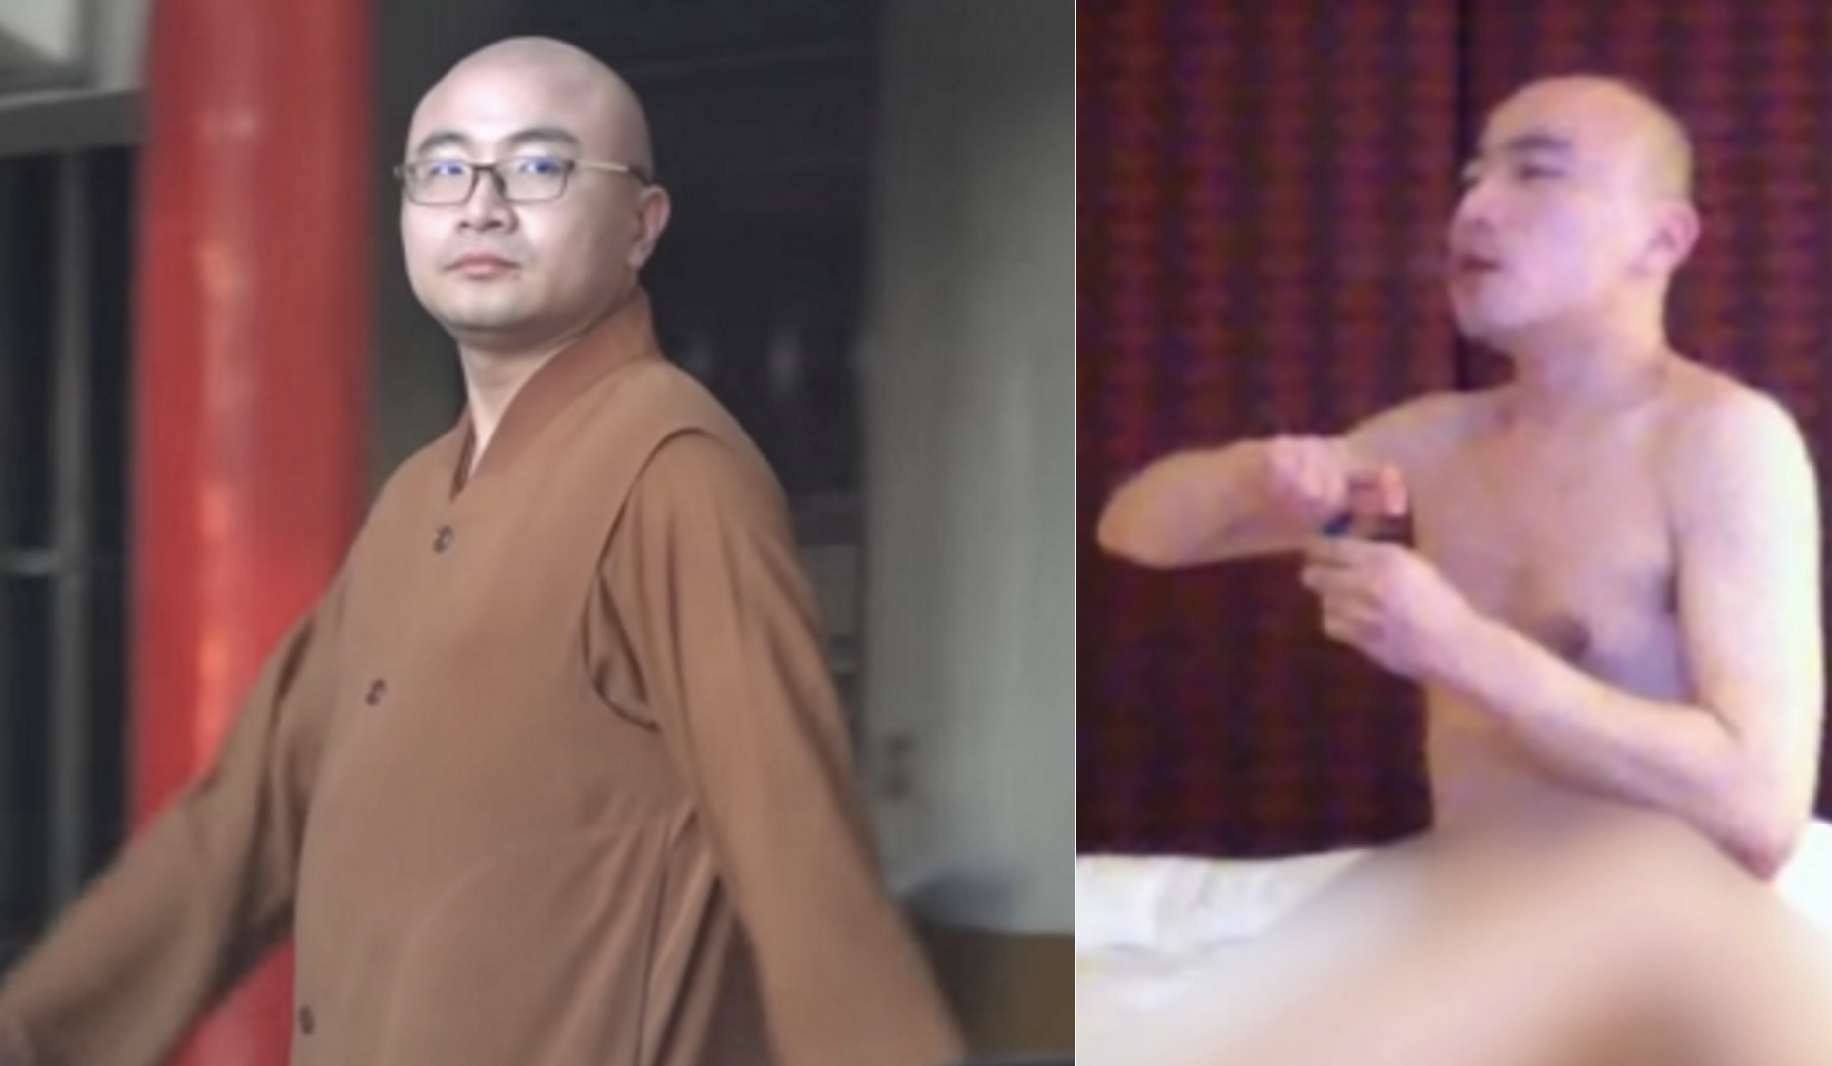 Pipes - Buddhist Monk Filmed Having ChemSex, Temple Filled with ...